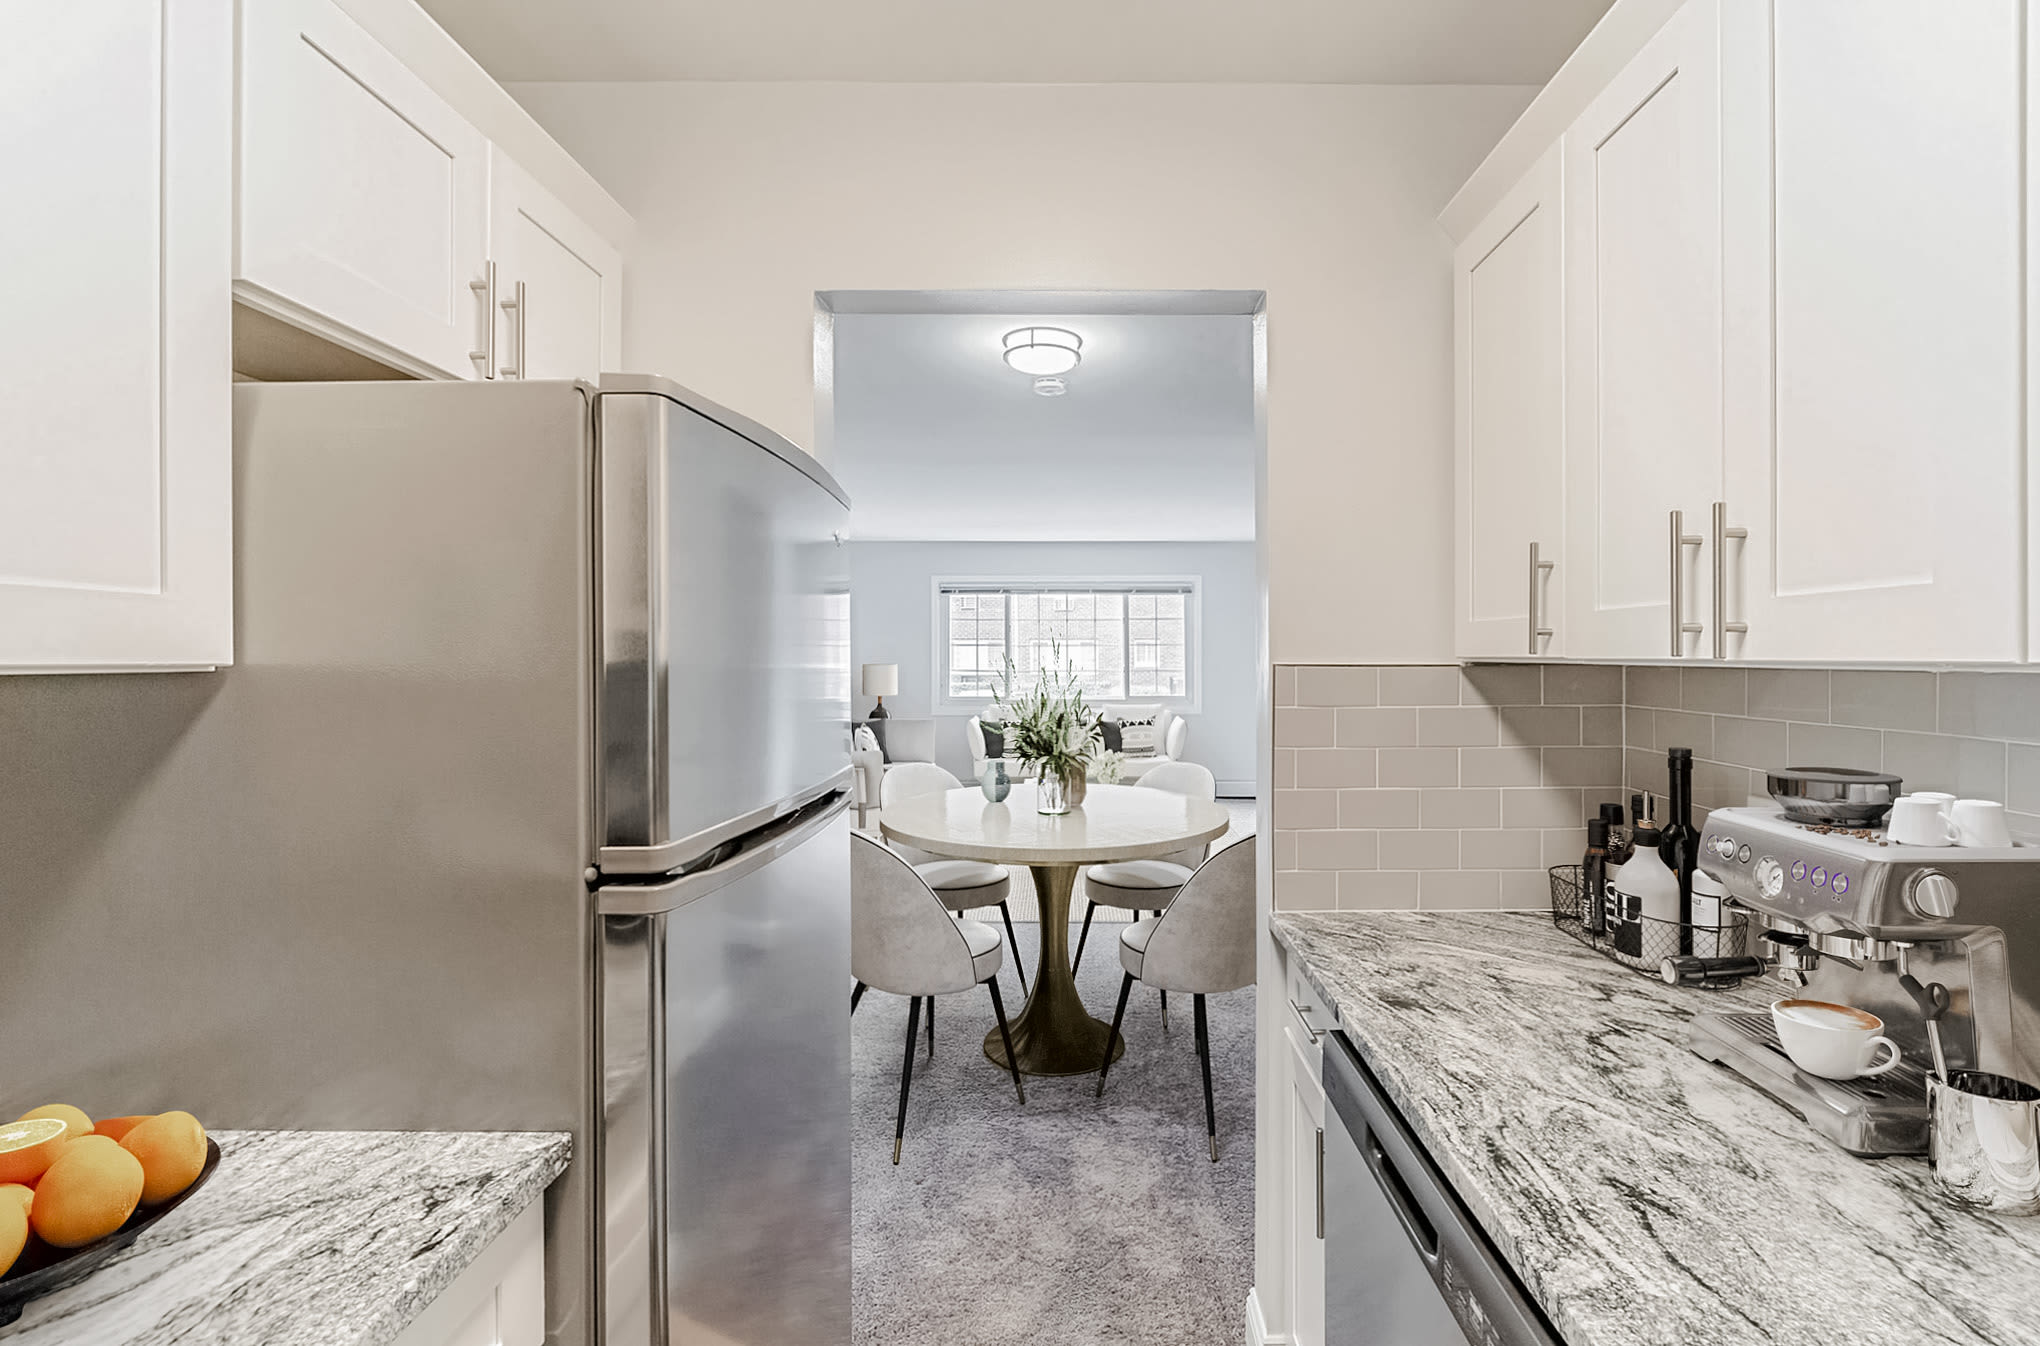 Updated kitchen cabinets at Eagle Rock Apartments at Mineola in Mineola, New York